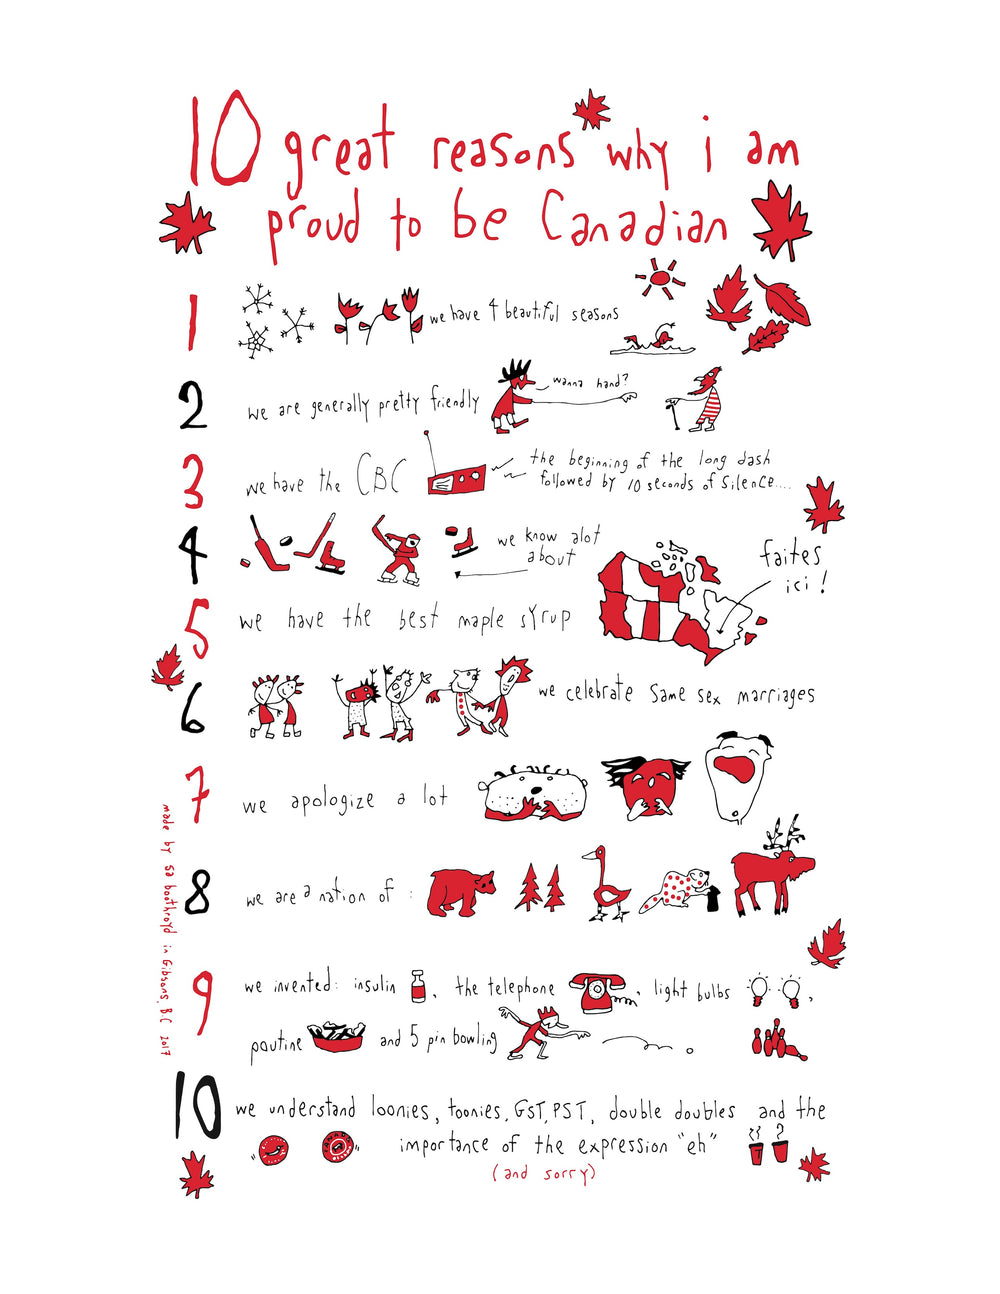 Print - 10 Great reasons why I am proud to be Canadian